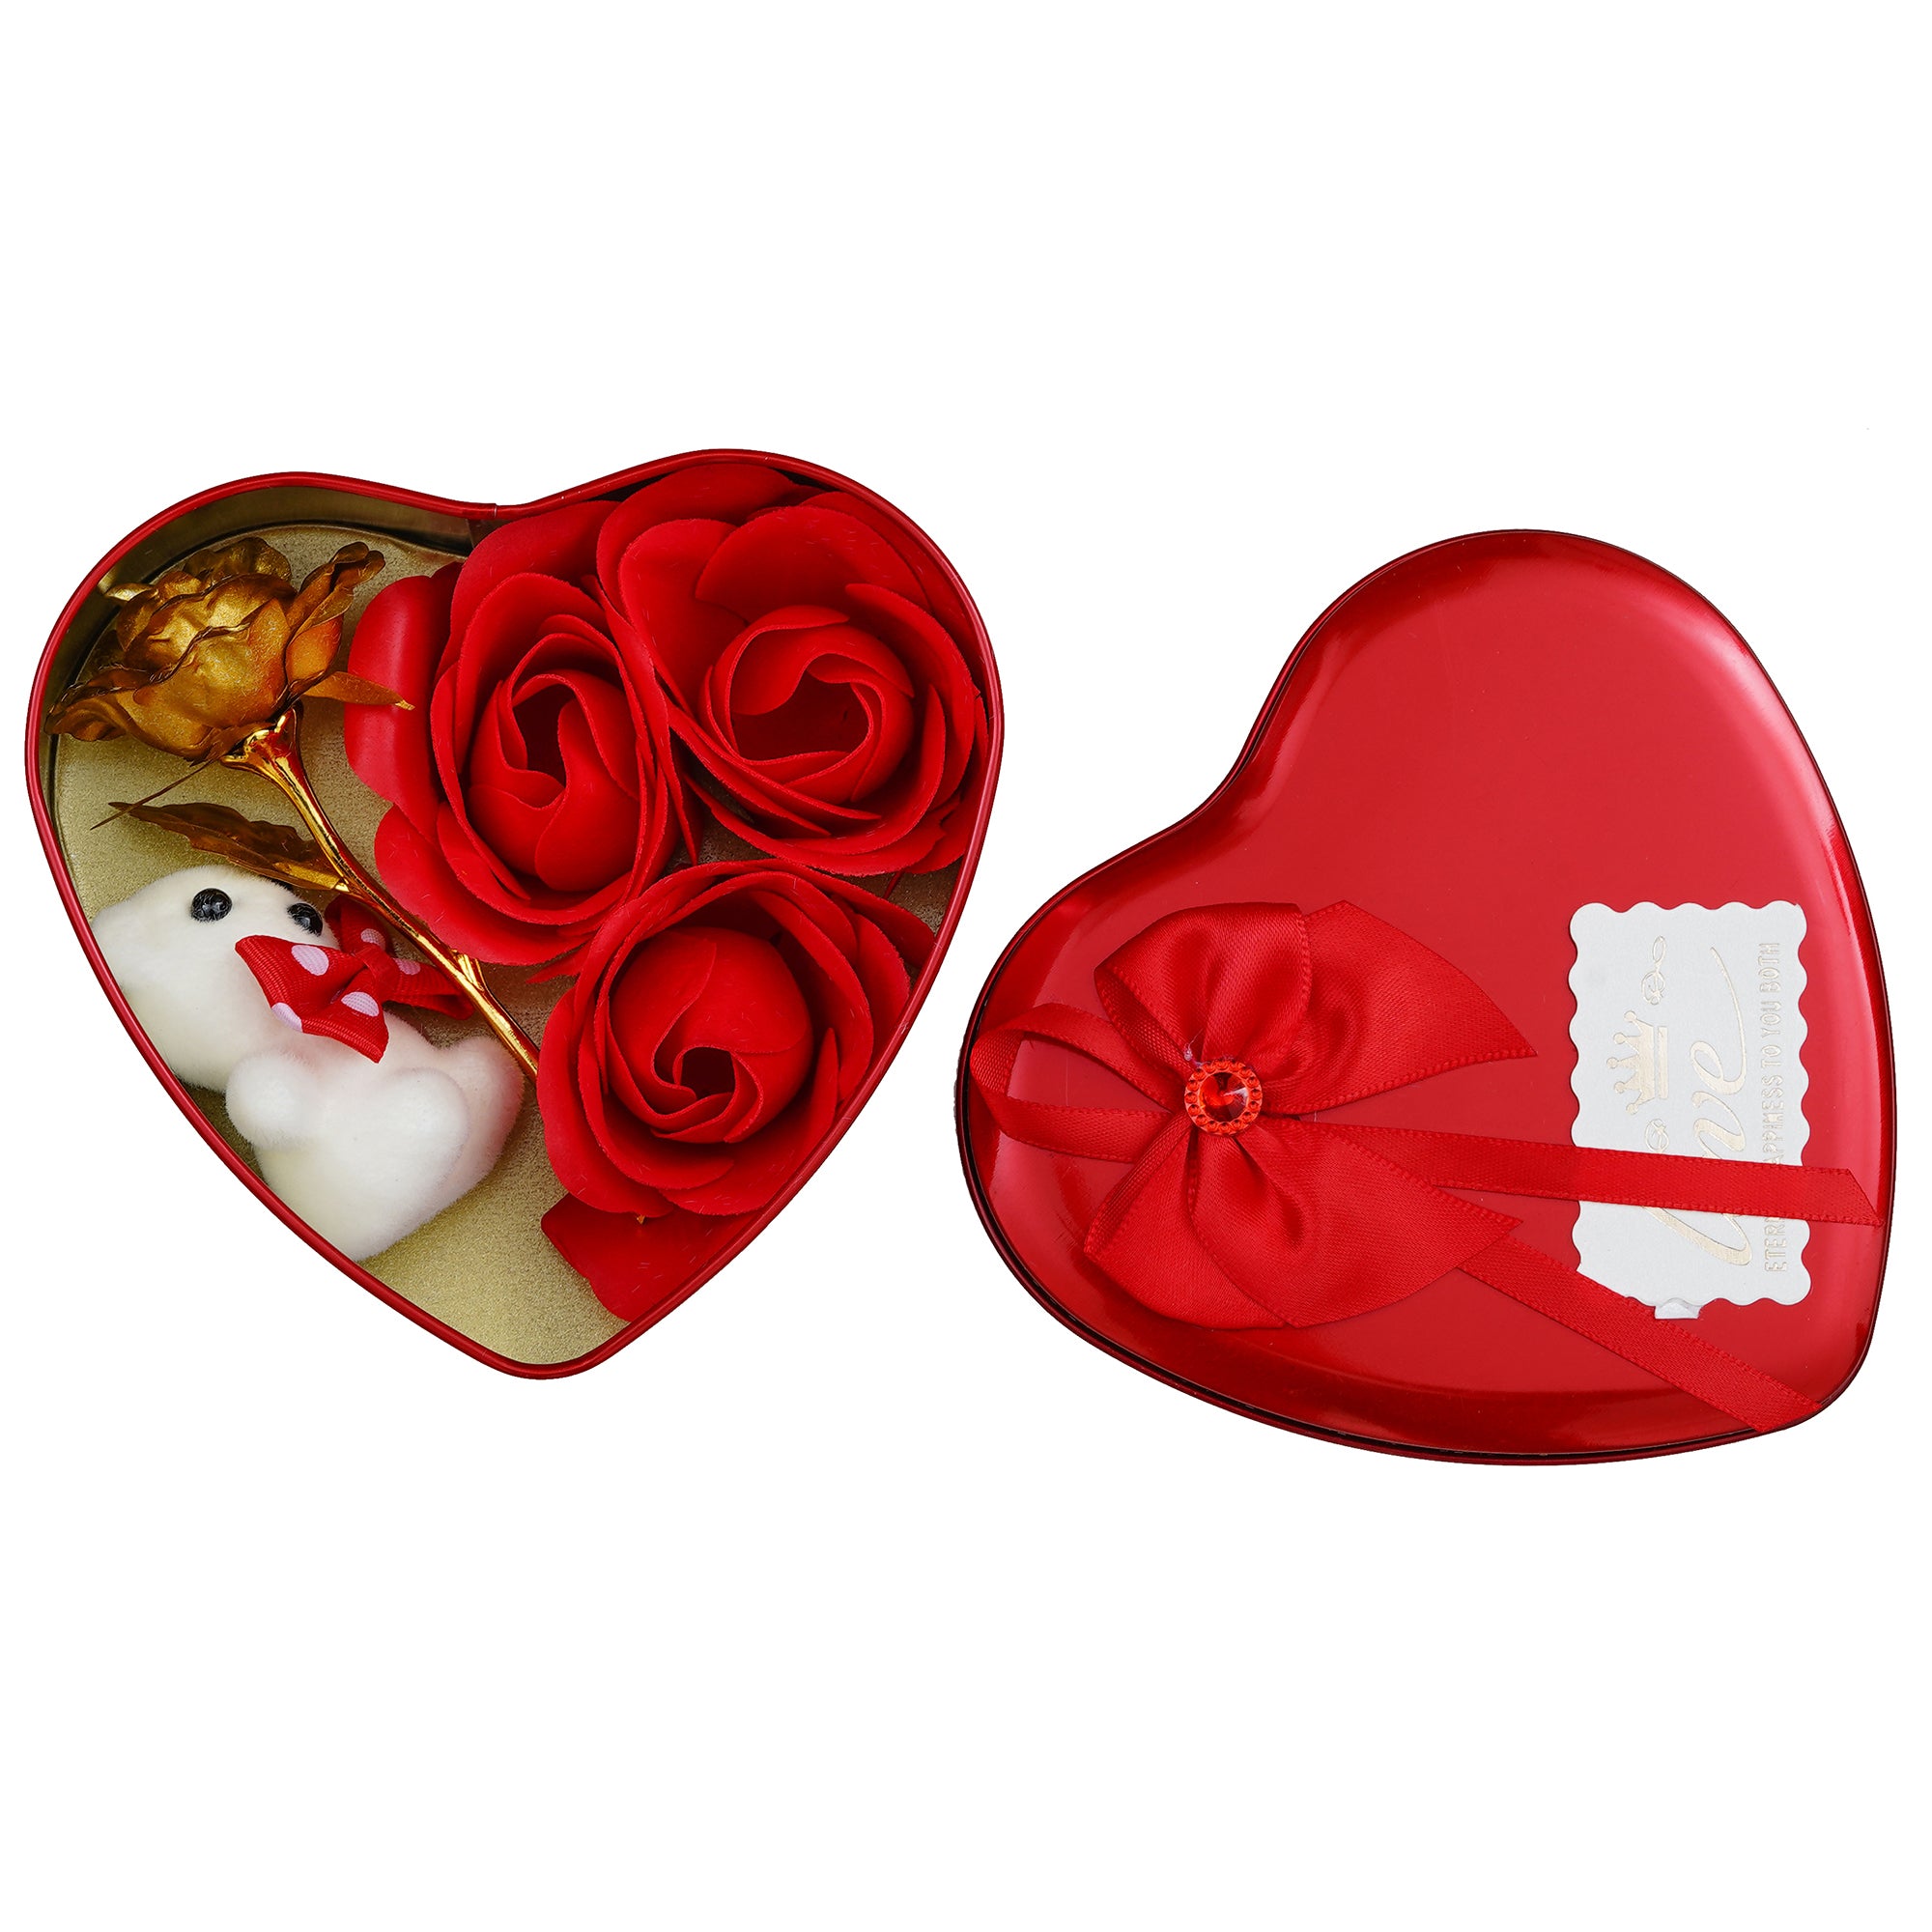 Red Heart Shaped Gift Box with 1 Golden Rose, 3 Red Roses, 2 Teddy Bear and a Card 2